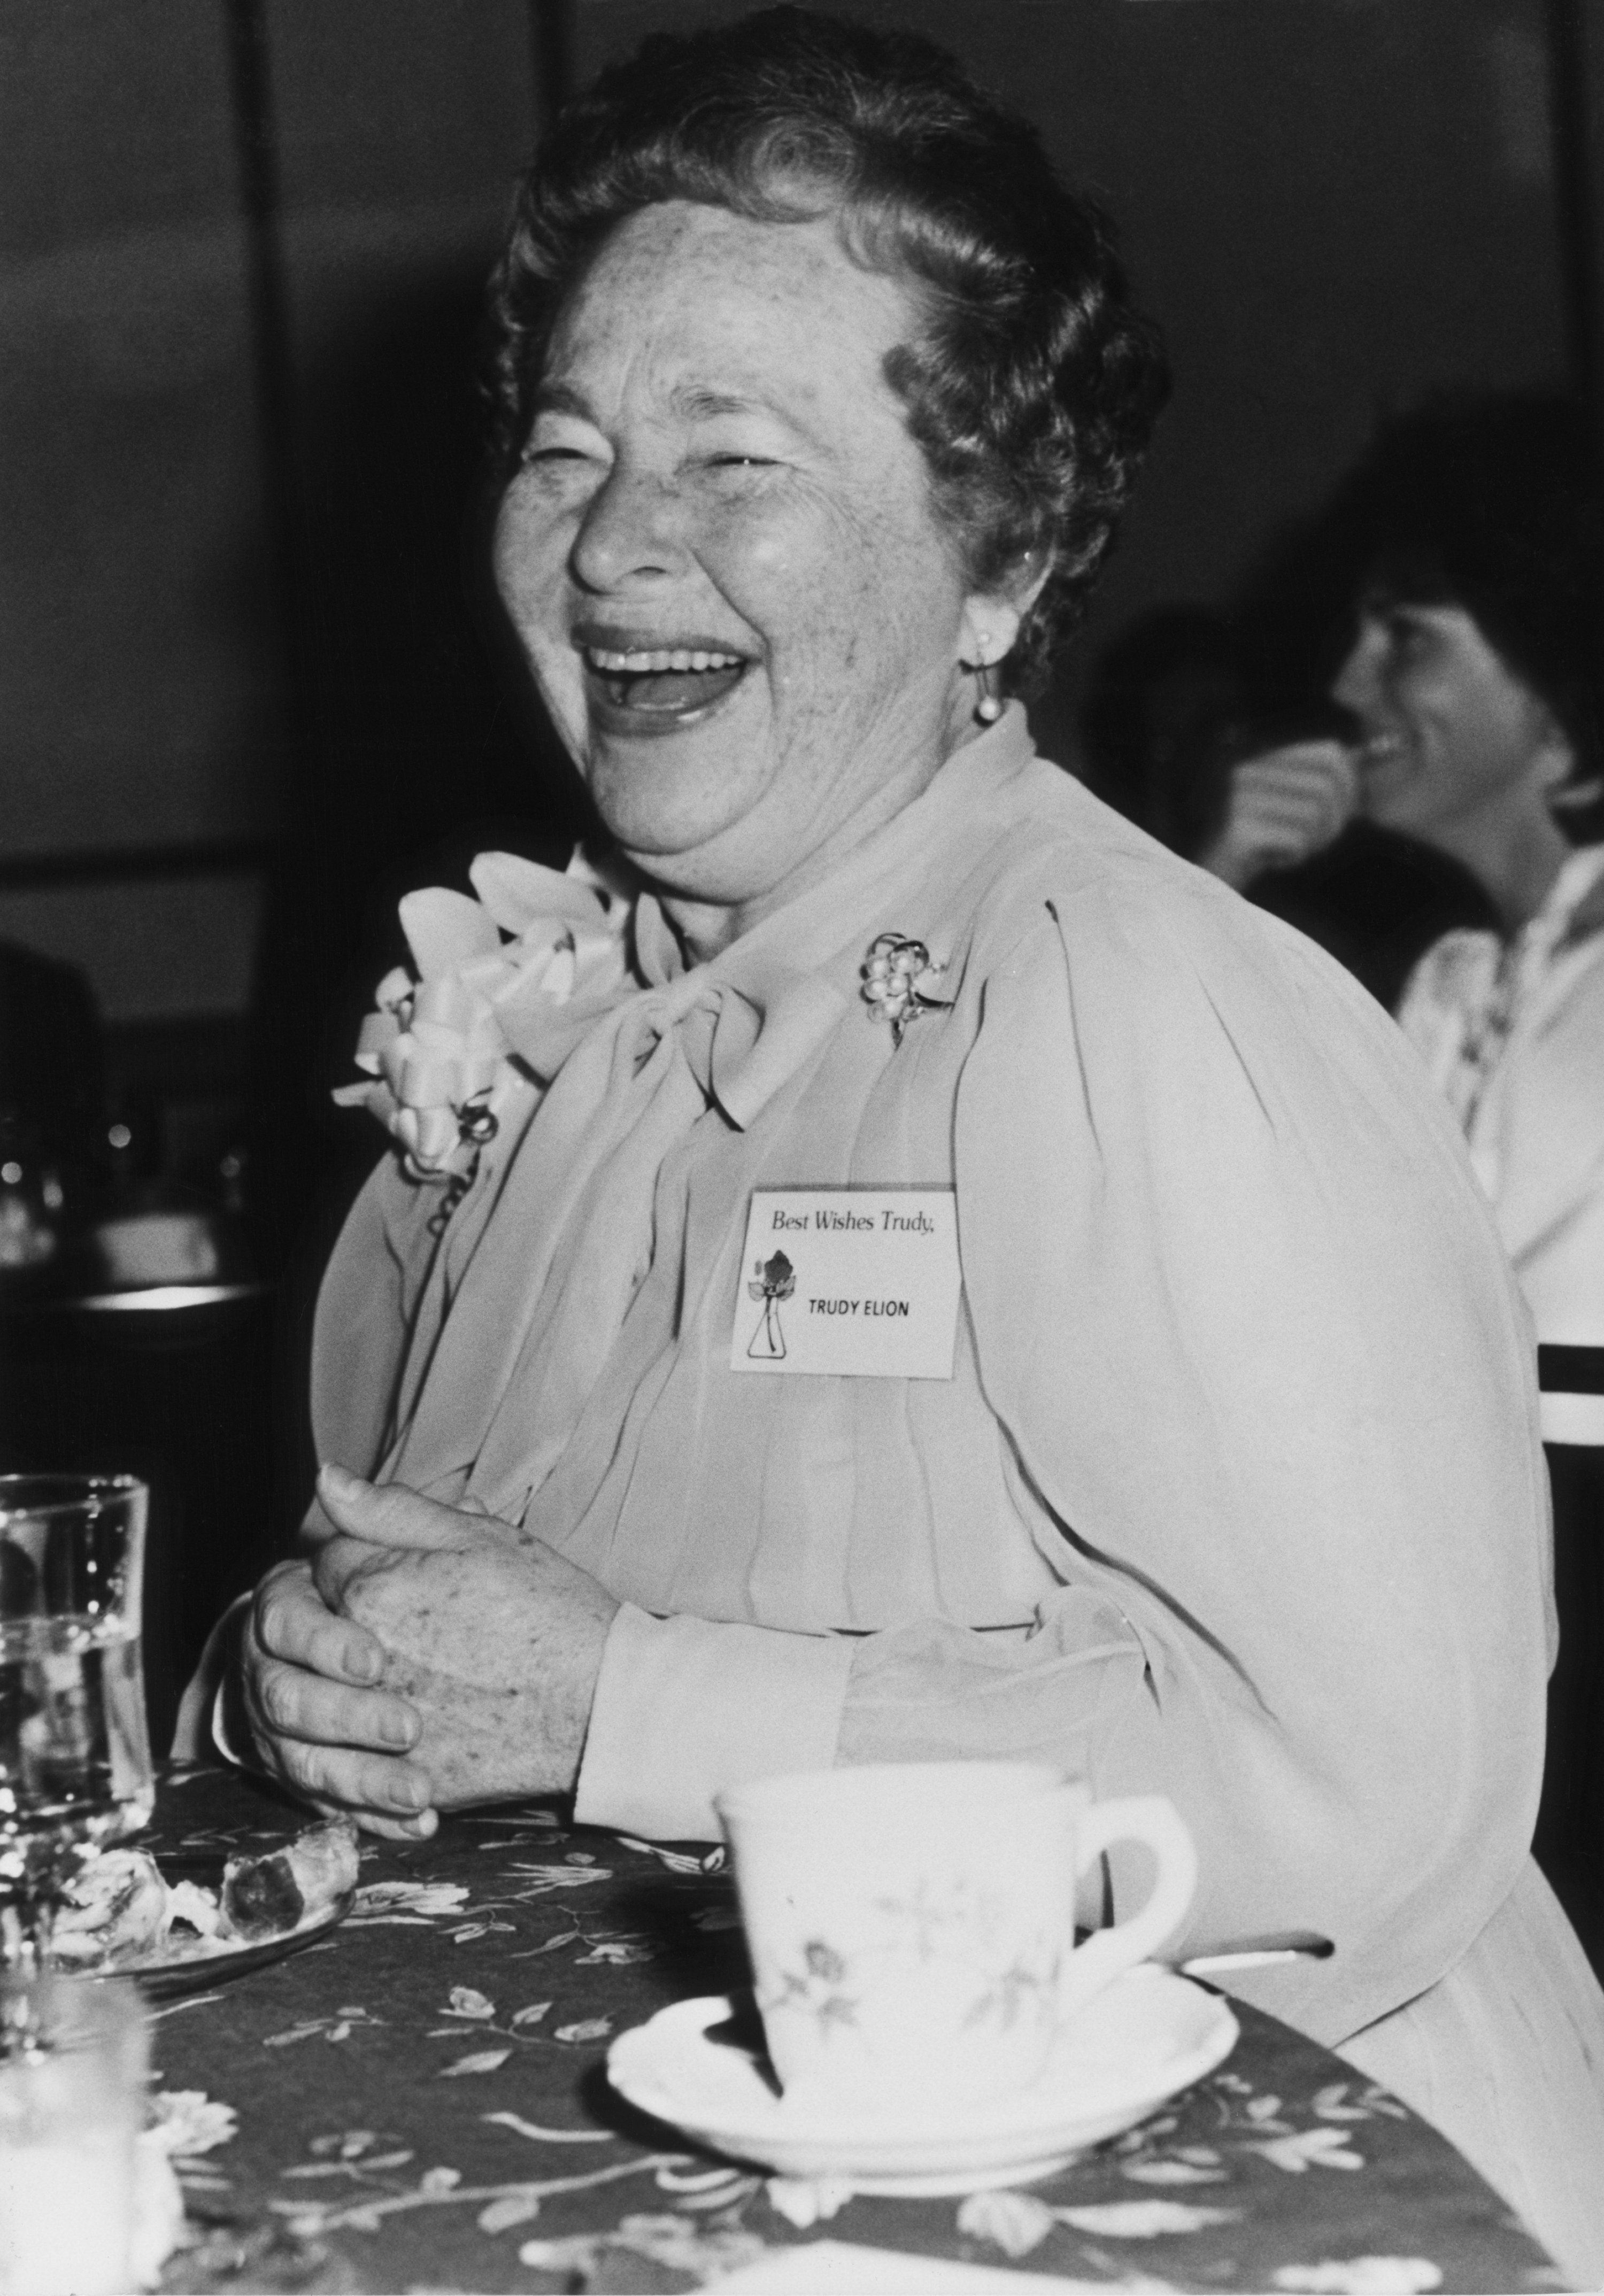 Gertrude Elion laughing, sitting at a table with a floral tablecloth and a teacup and saucer in front of her